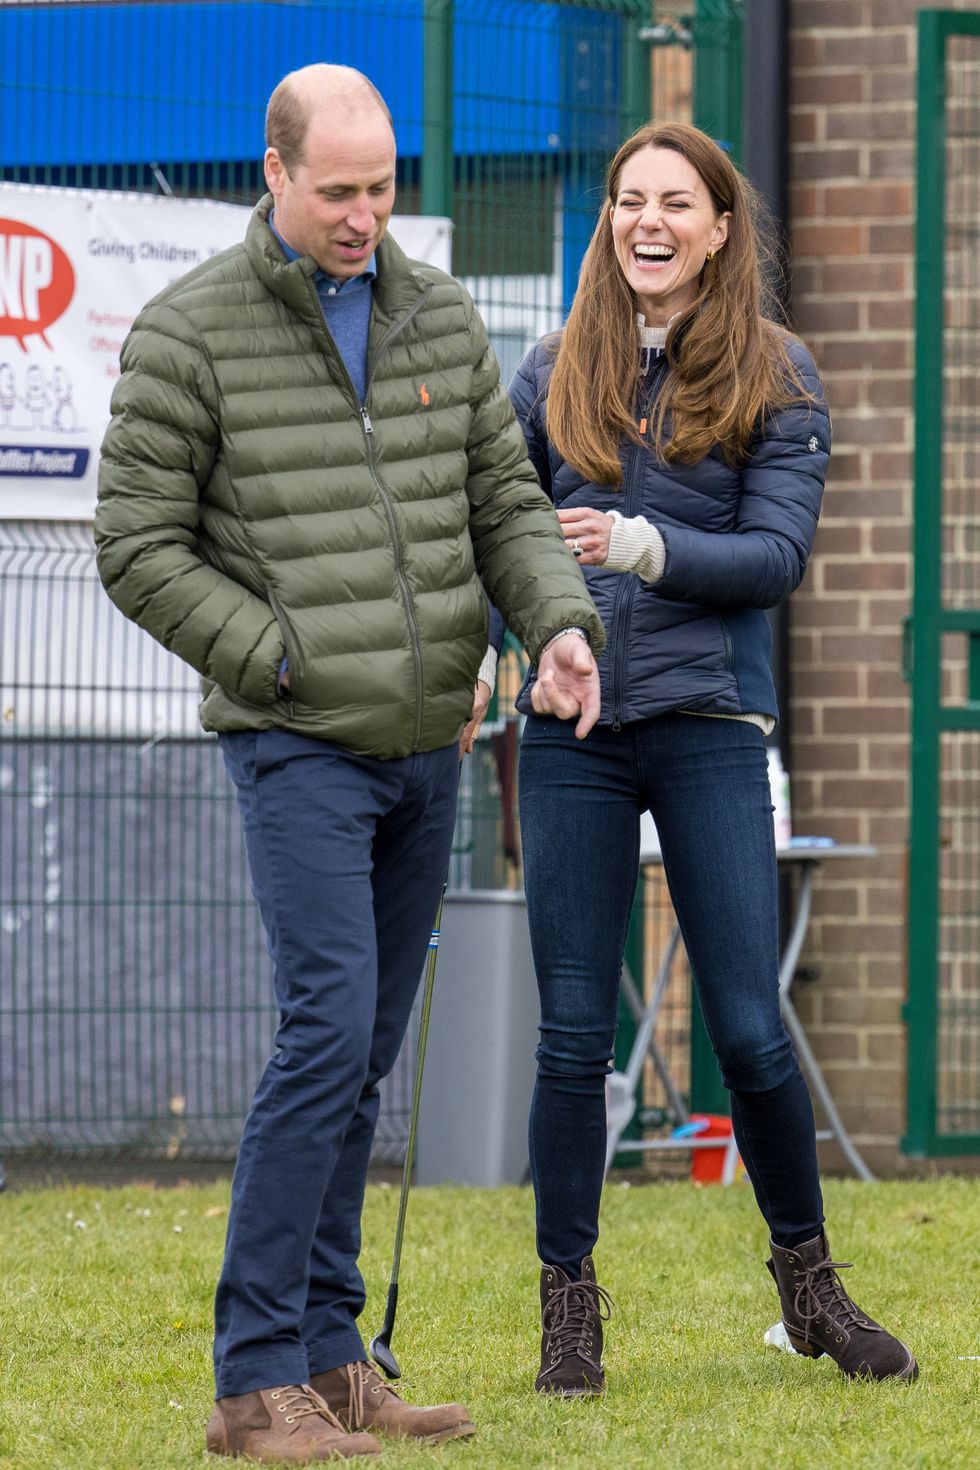 kate middleton and prince william pda moments